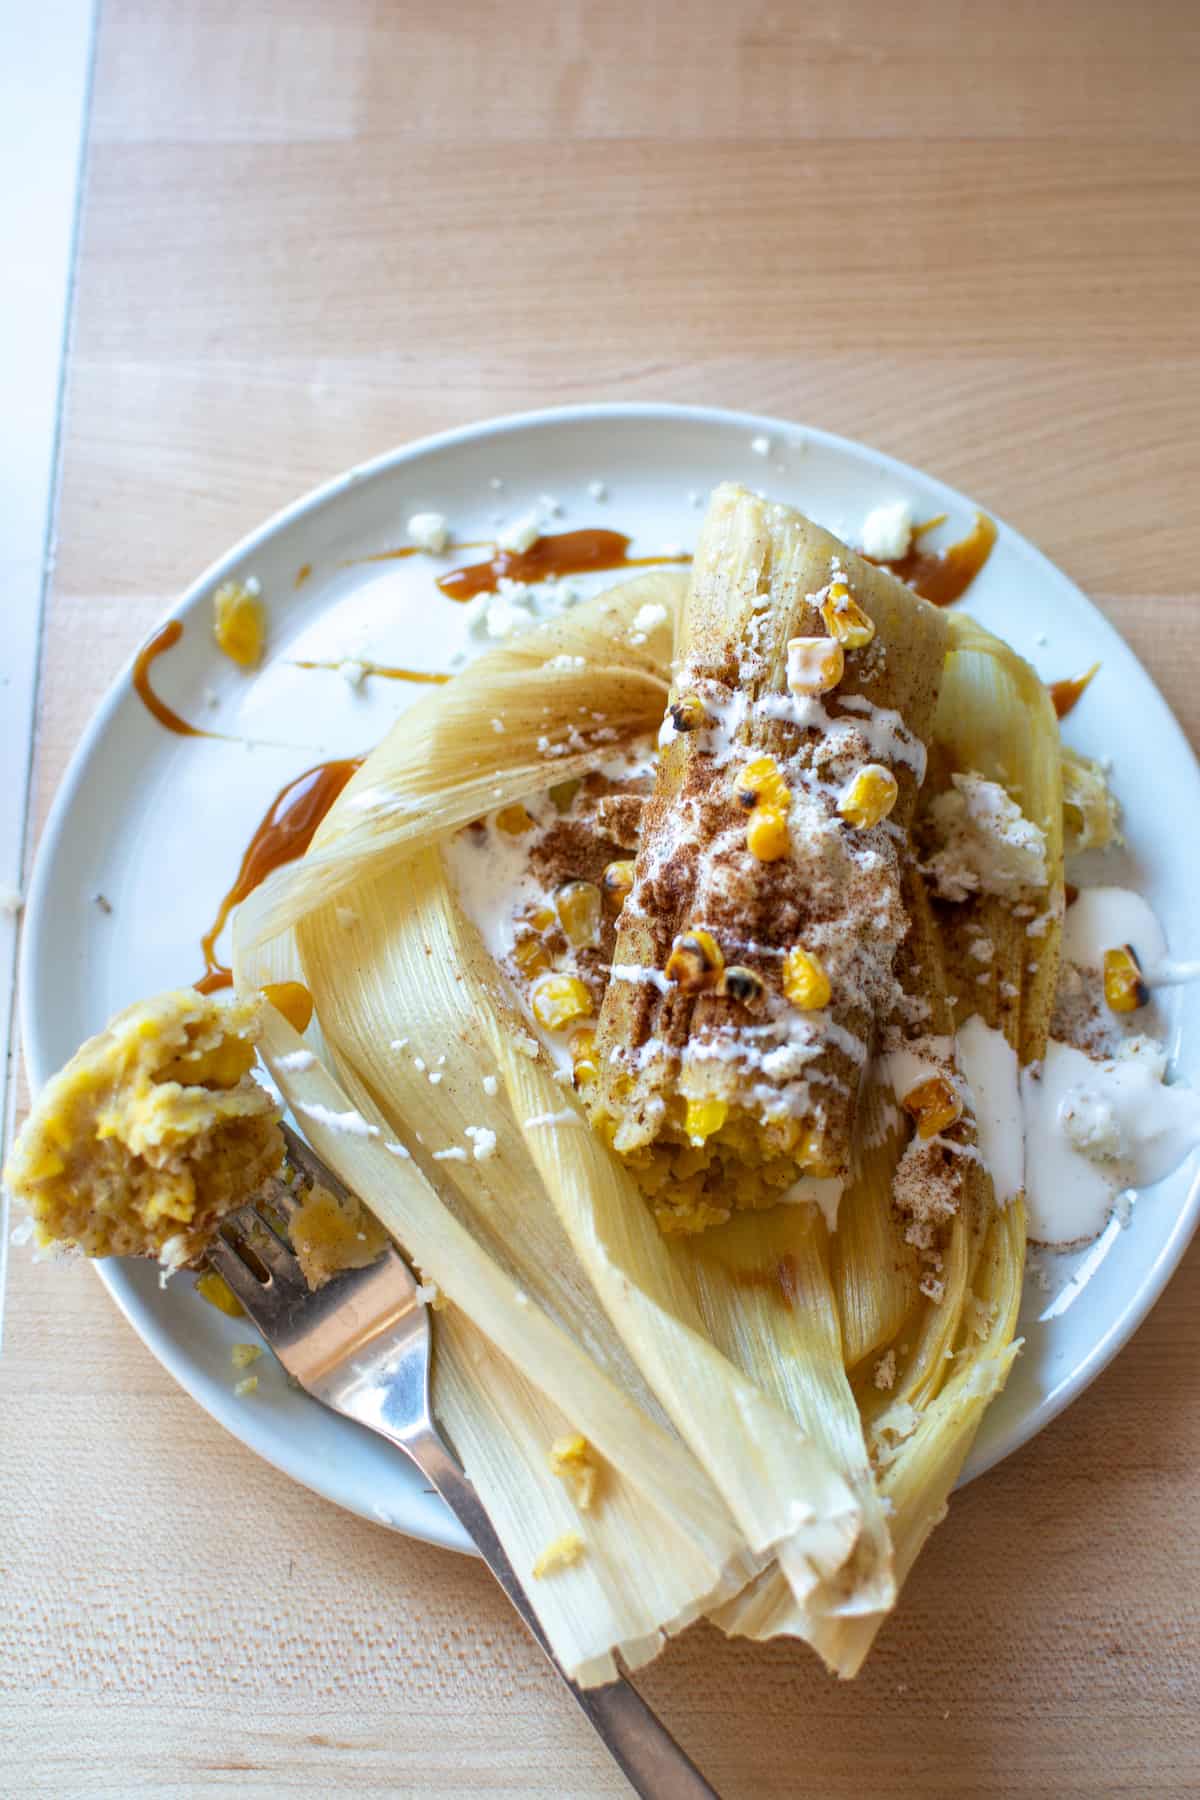 A corn tamal on a white plate topped with crema and cinnamon